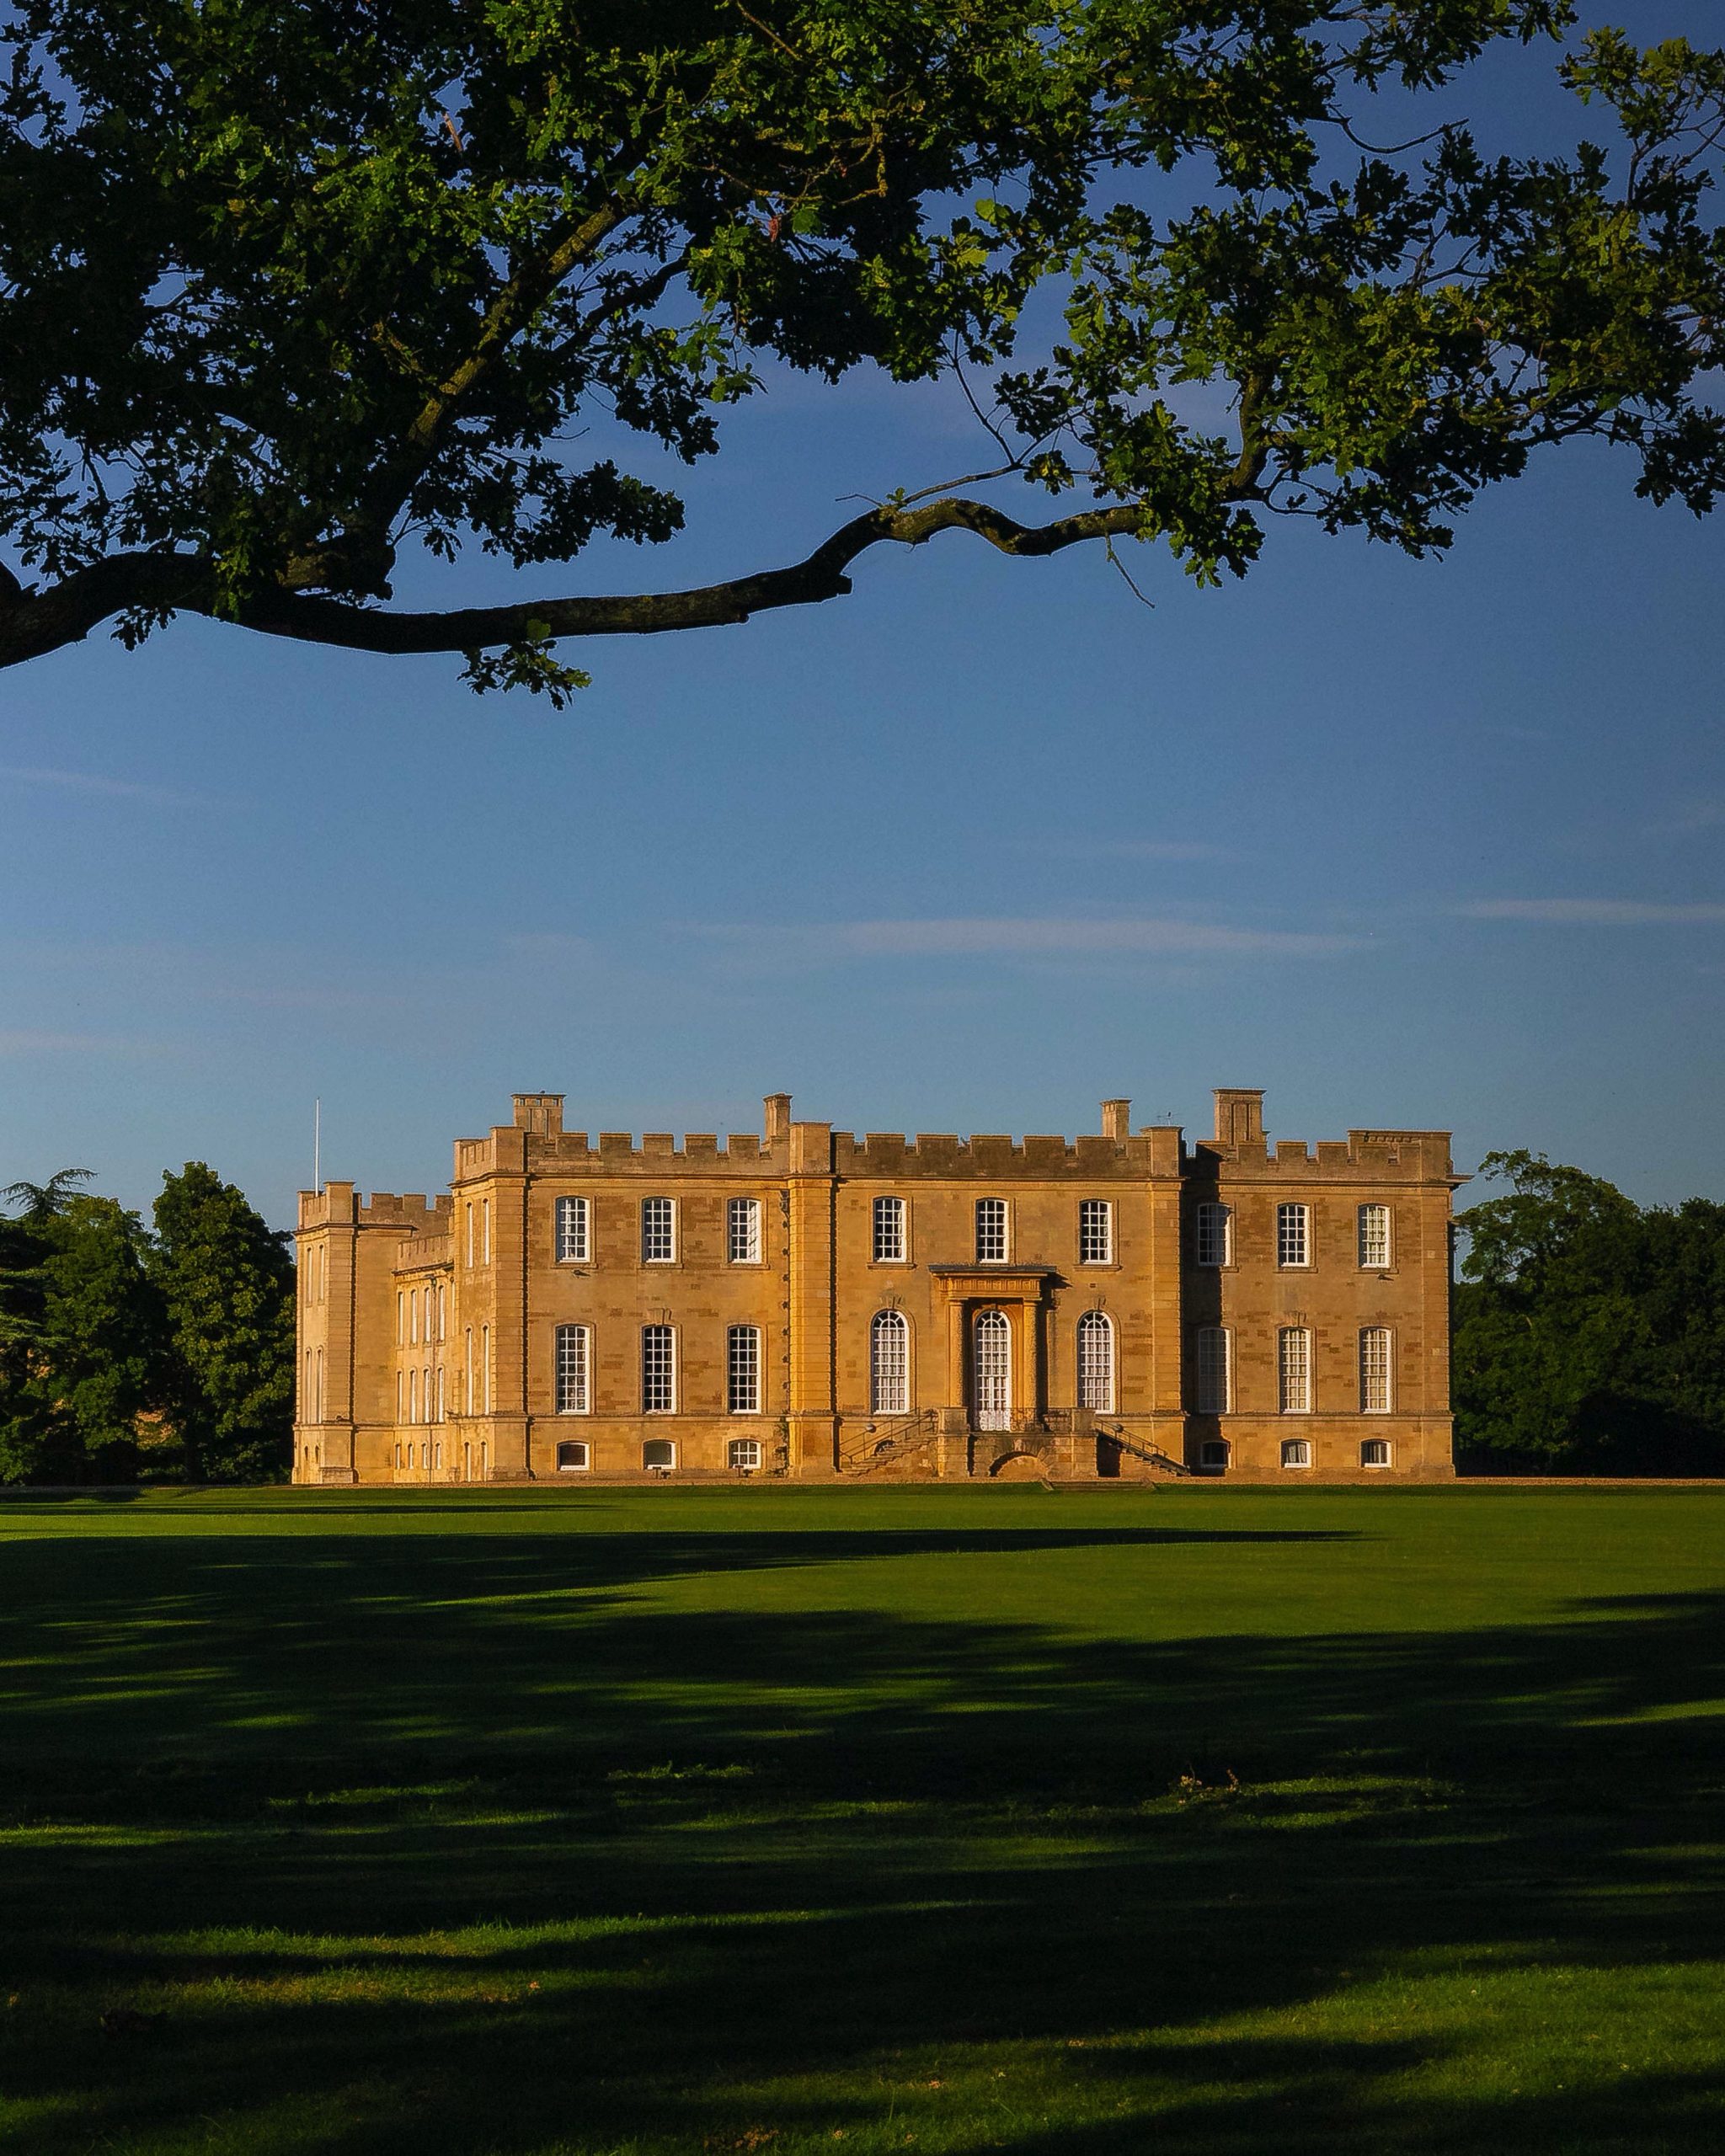 Photo of Kimbolton Castle from beneath a tree.